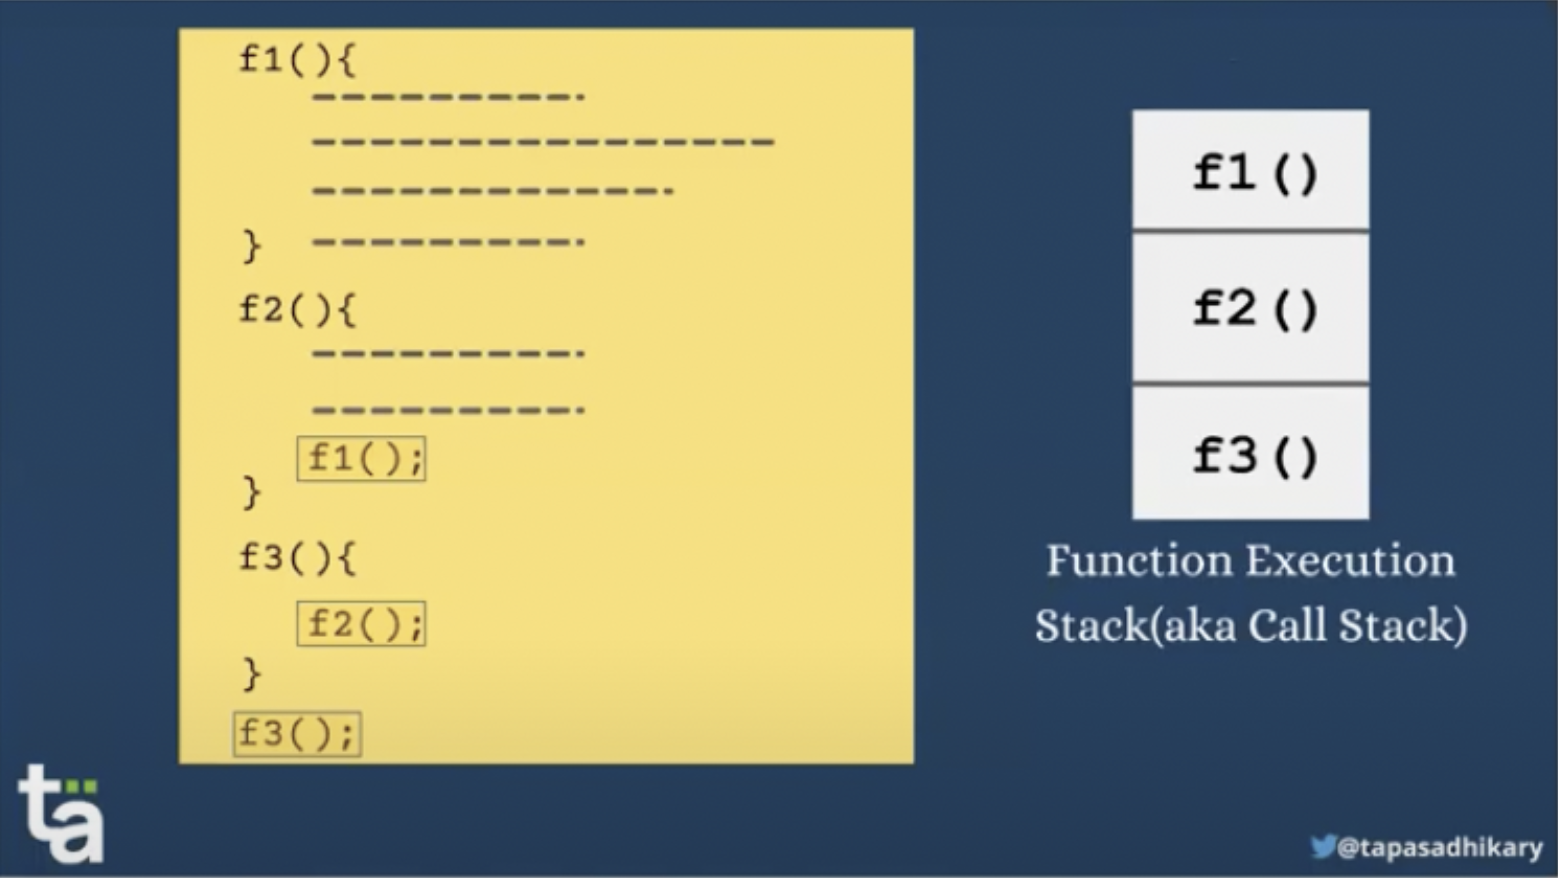 Function execution stack